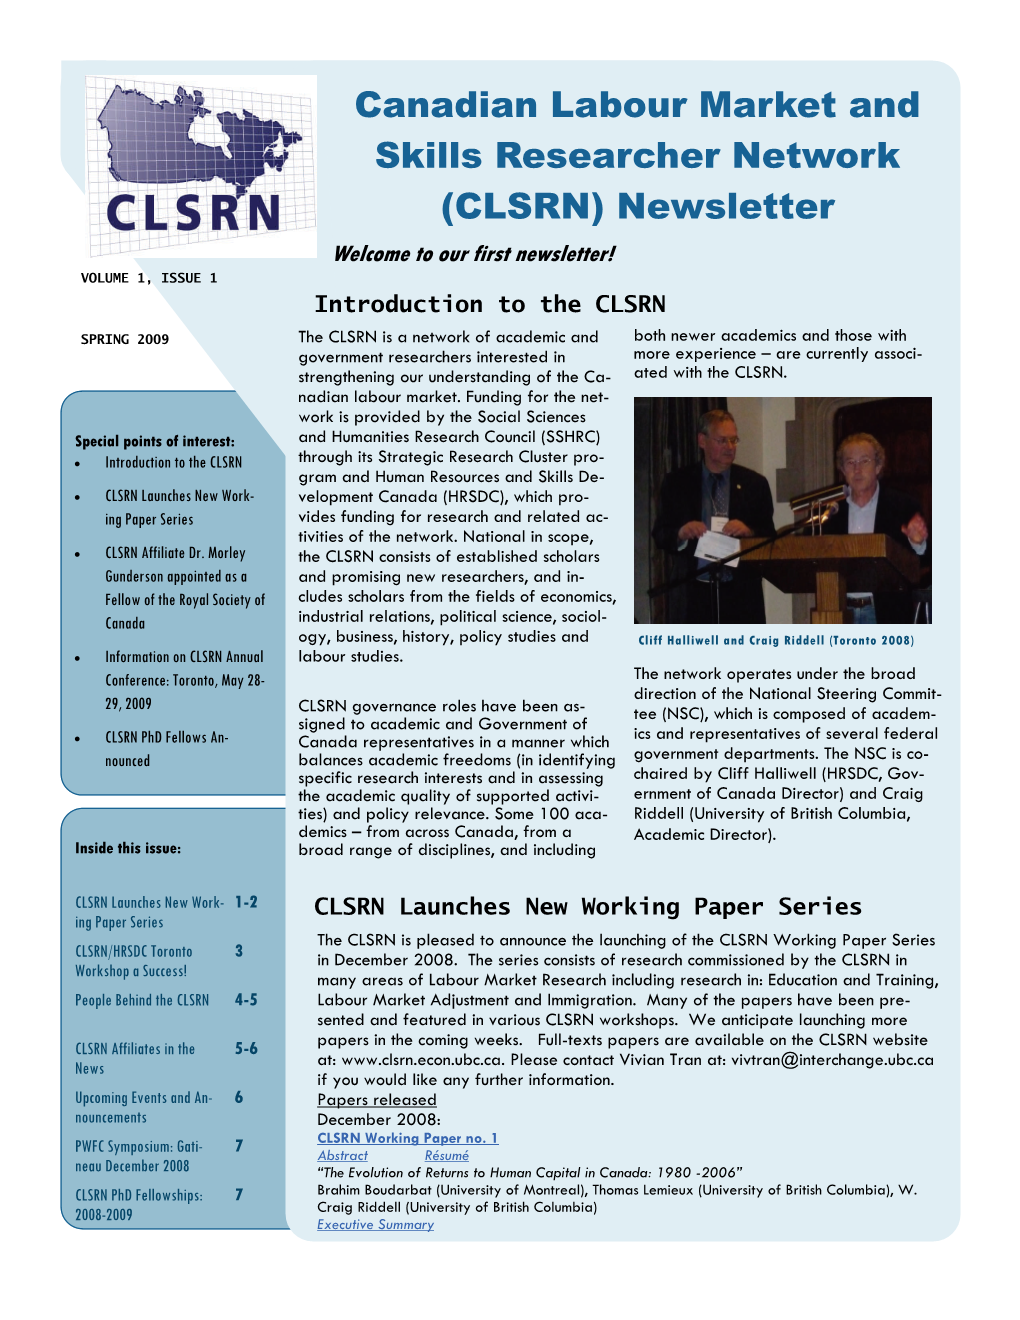 Canadian Labour Market and Skills Researcher Network (CLSRN) Newsletter Welcome to Our First Newsletter! VOLUME 1, ISSUE 1 Introduction to the CLSRN